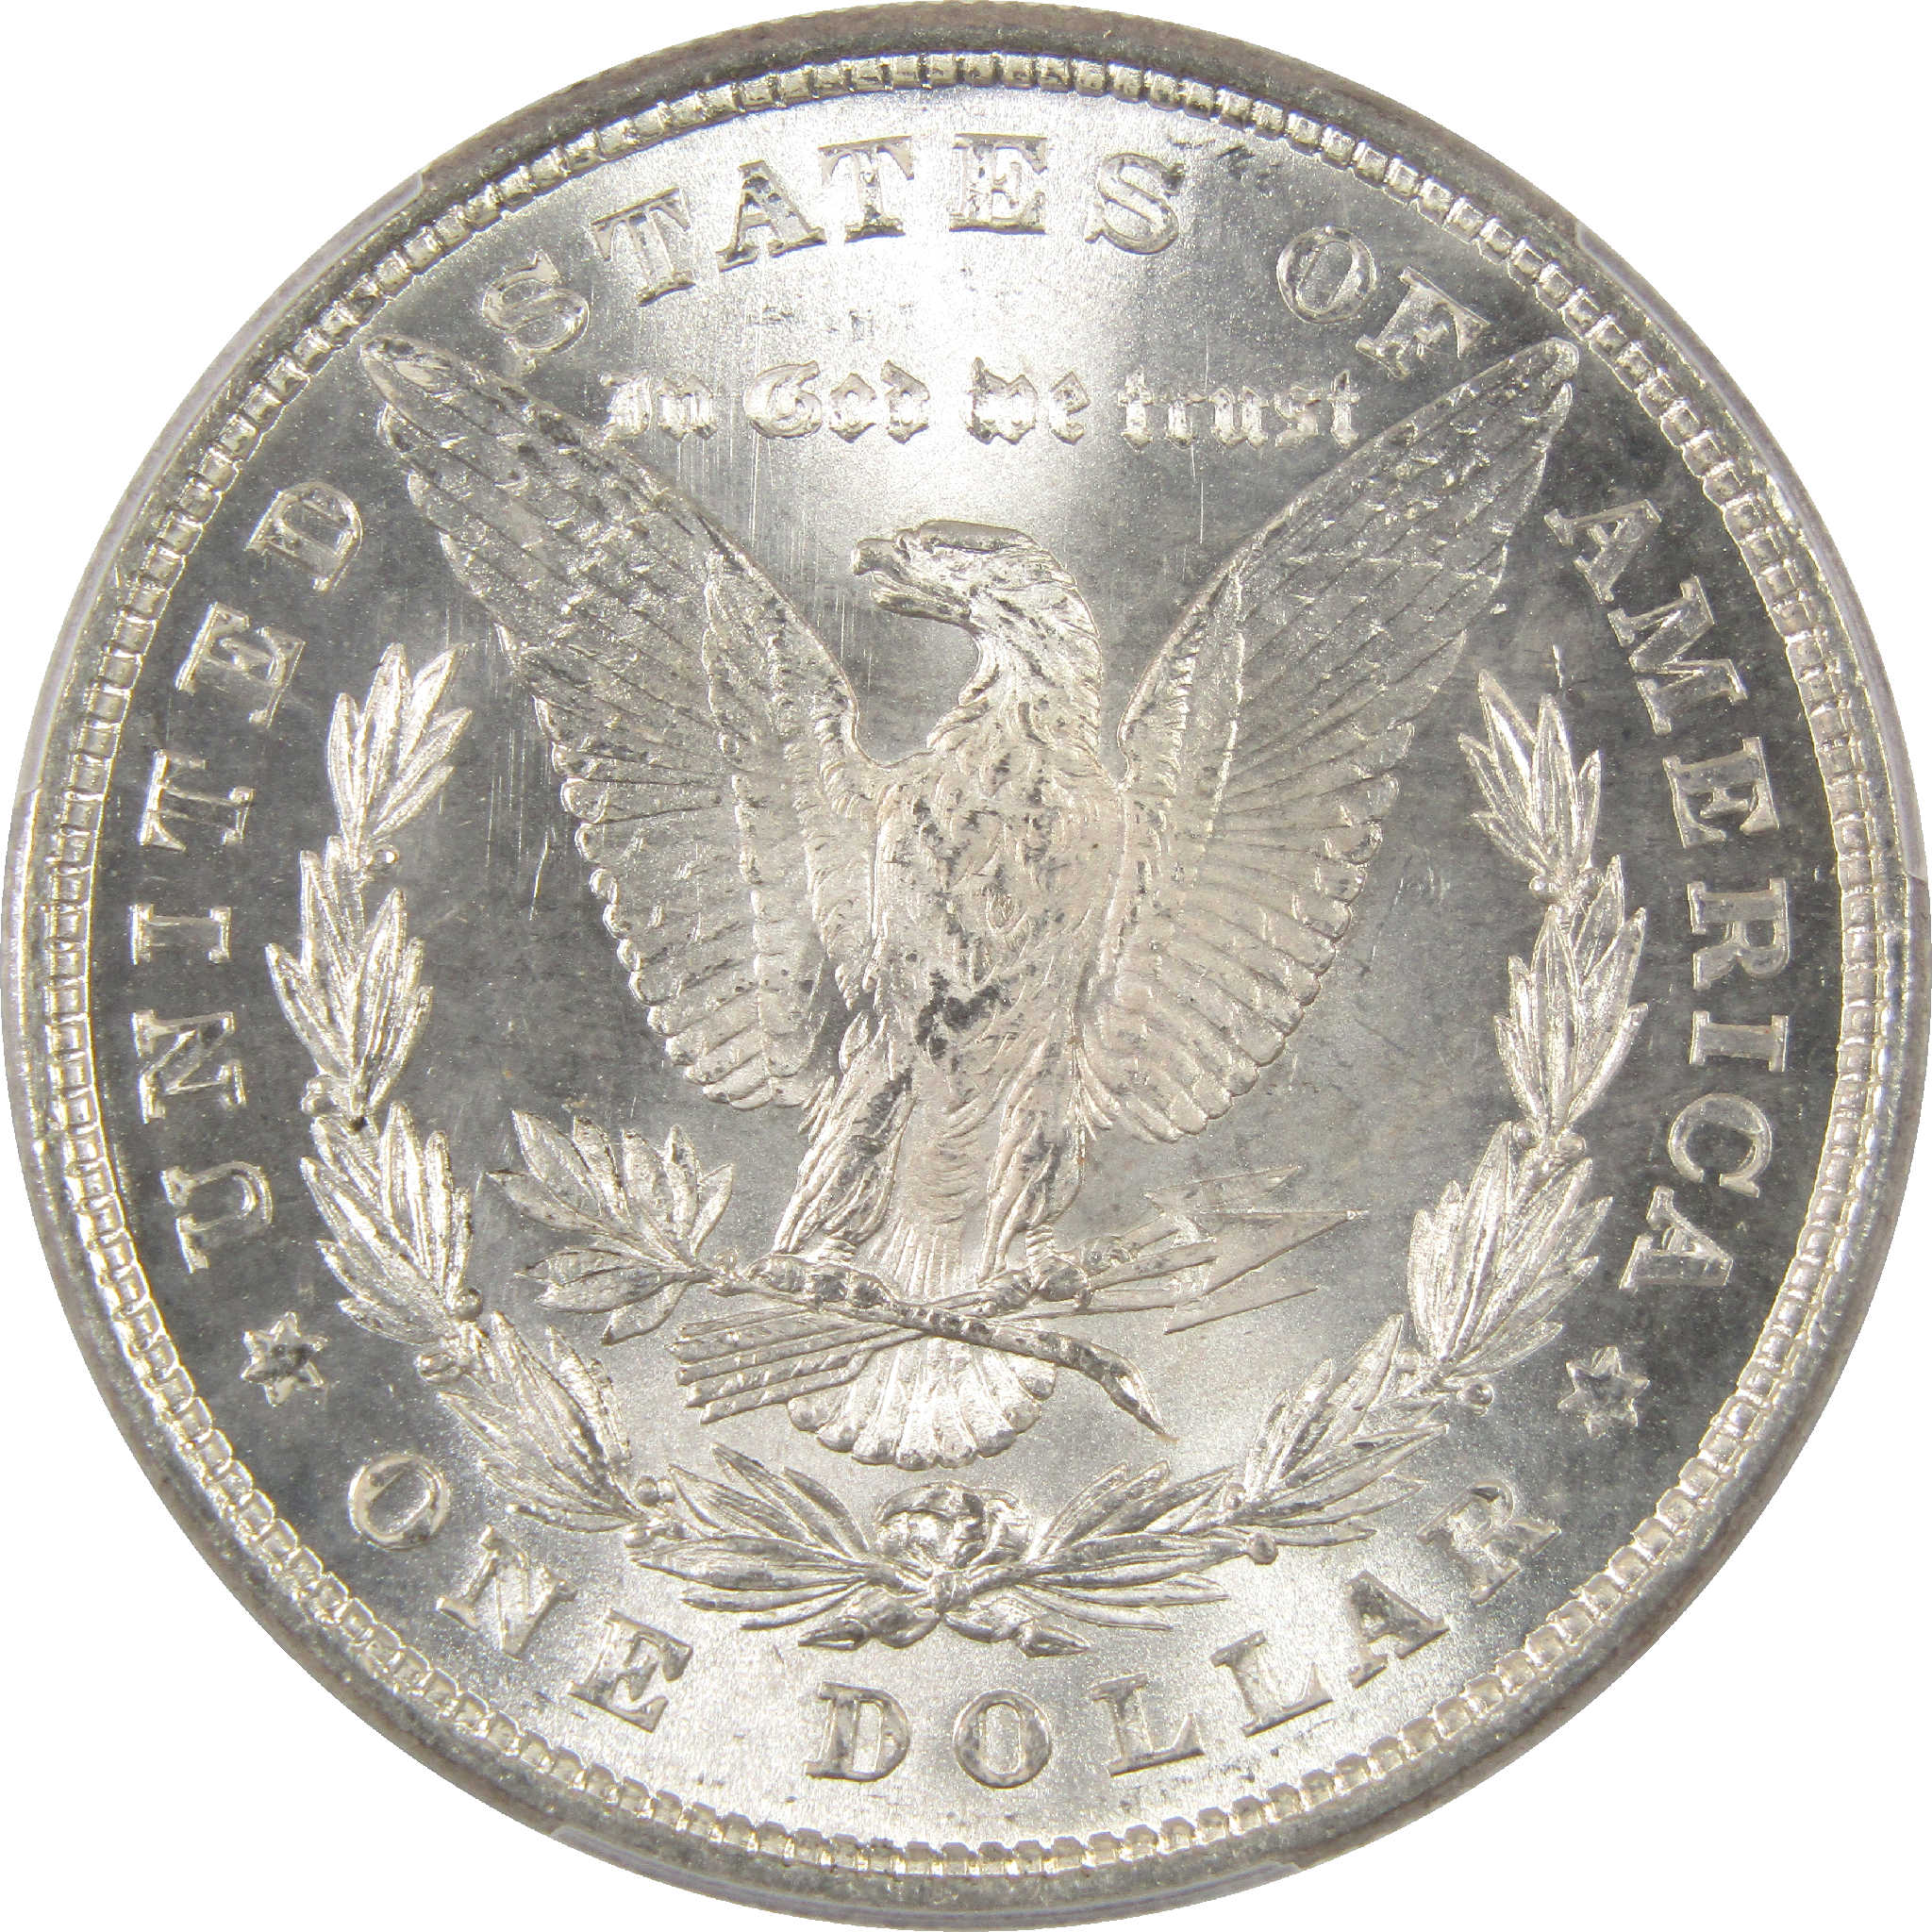 1878 8TF Morgan Dollar MS 63 PCGS Silver $1 Uncirculated SKU:I11335 - Morgan coin - Morgan silver dollar - Morgan silver dollar for sale - Profile Coins &amp; Collectibles